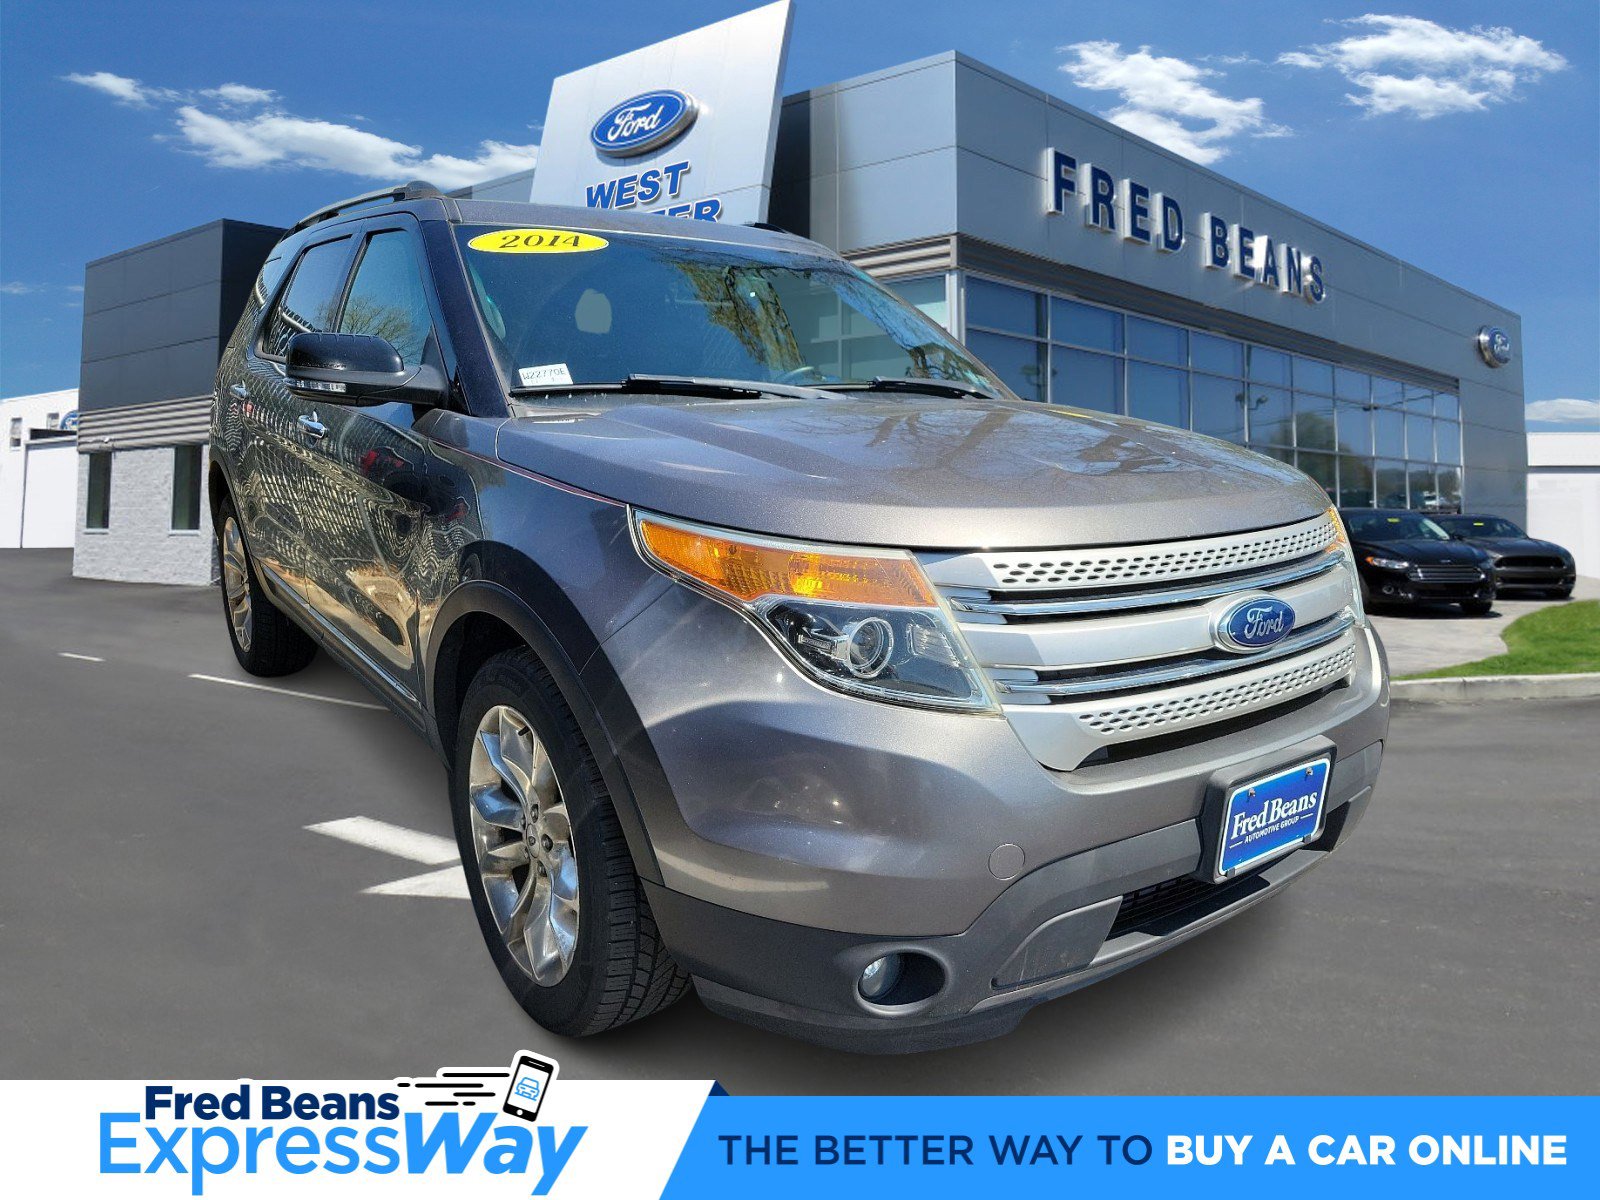 2014 Ford Explorer West Chester PA